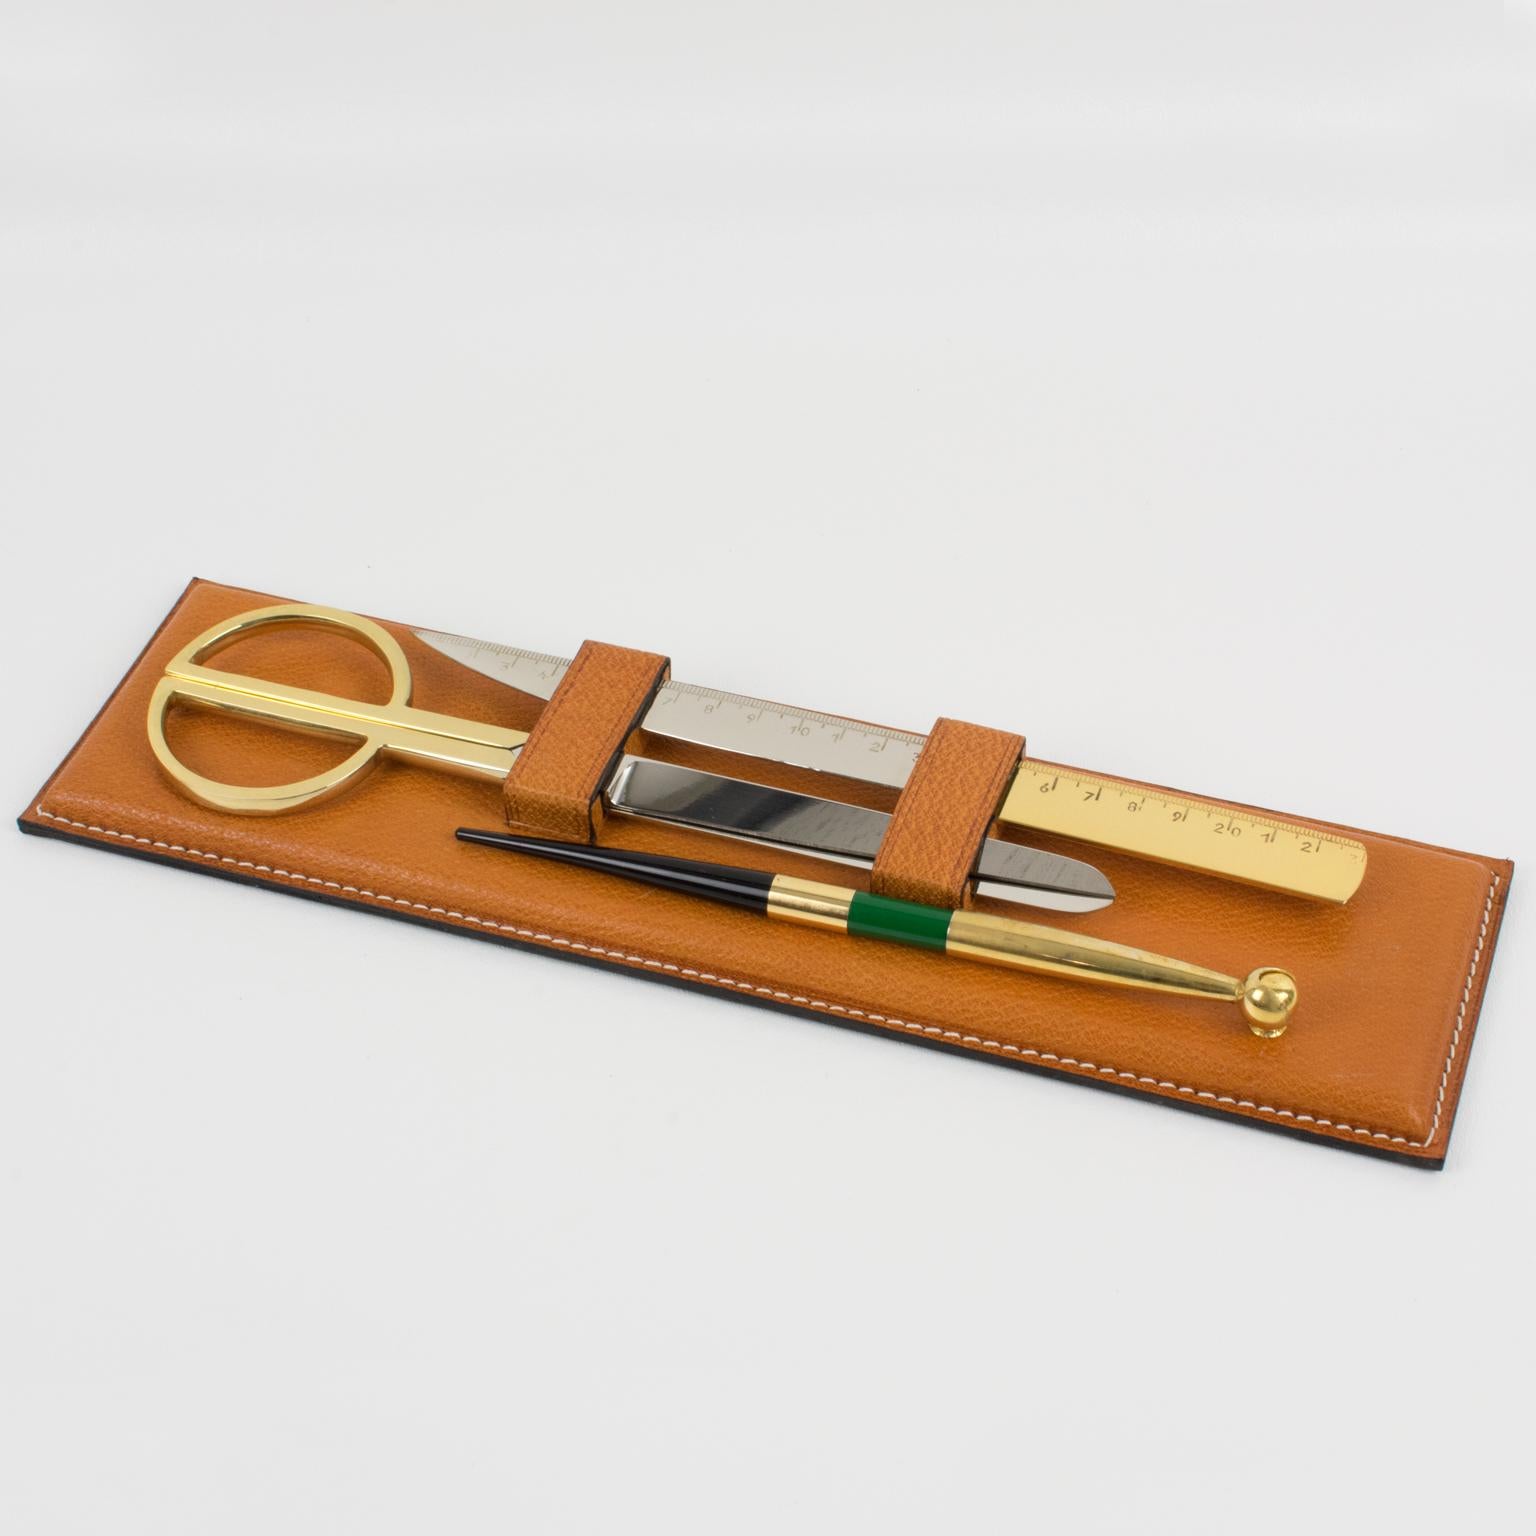 Stylish 1940s modernist leather desk accessory set by Longchamp, Paris. Natural light cognac leather with pattern and hand-stitched finish base with a pen, a letter opener, and a pair of scissors. The pair of scissors is in polished brass and chrome